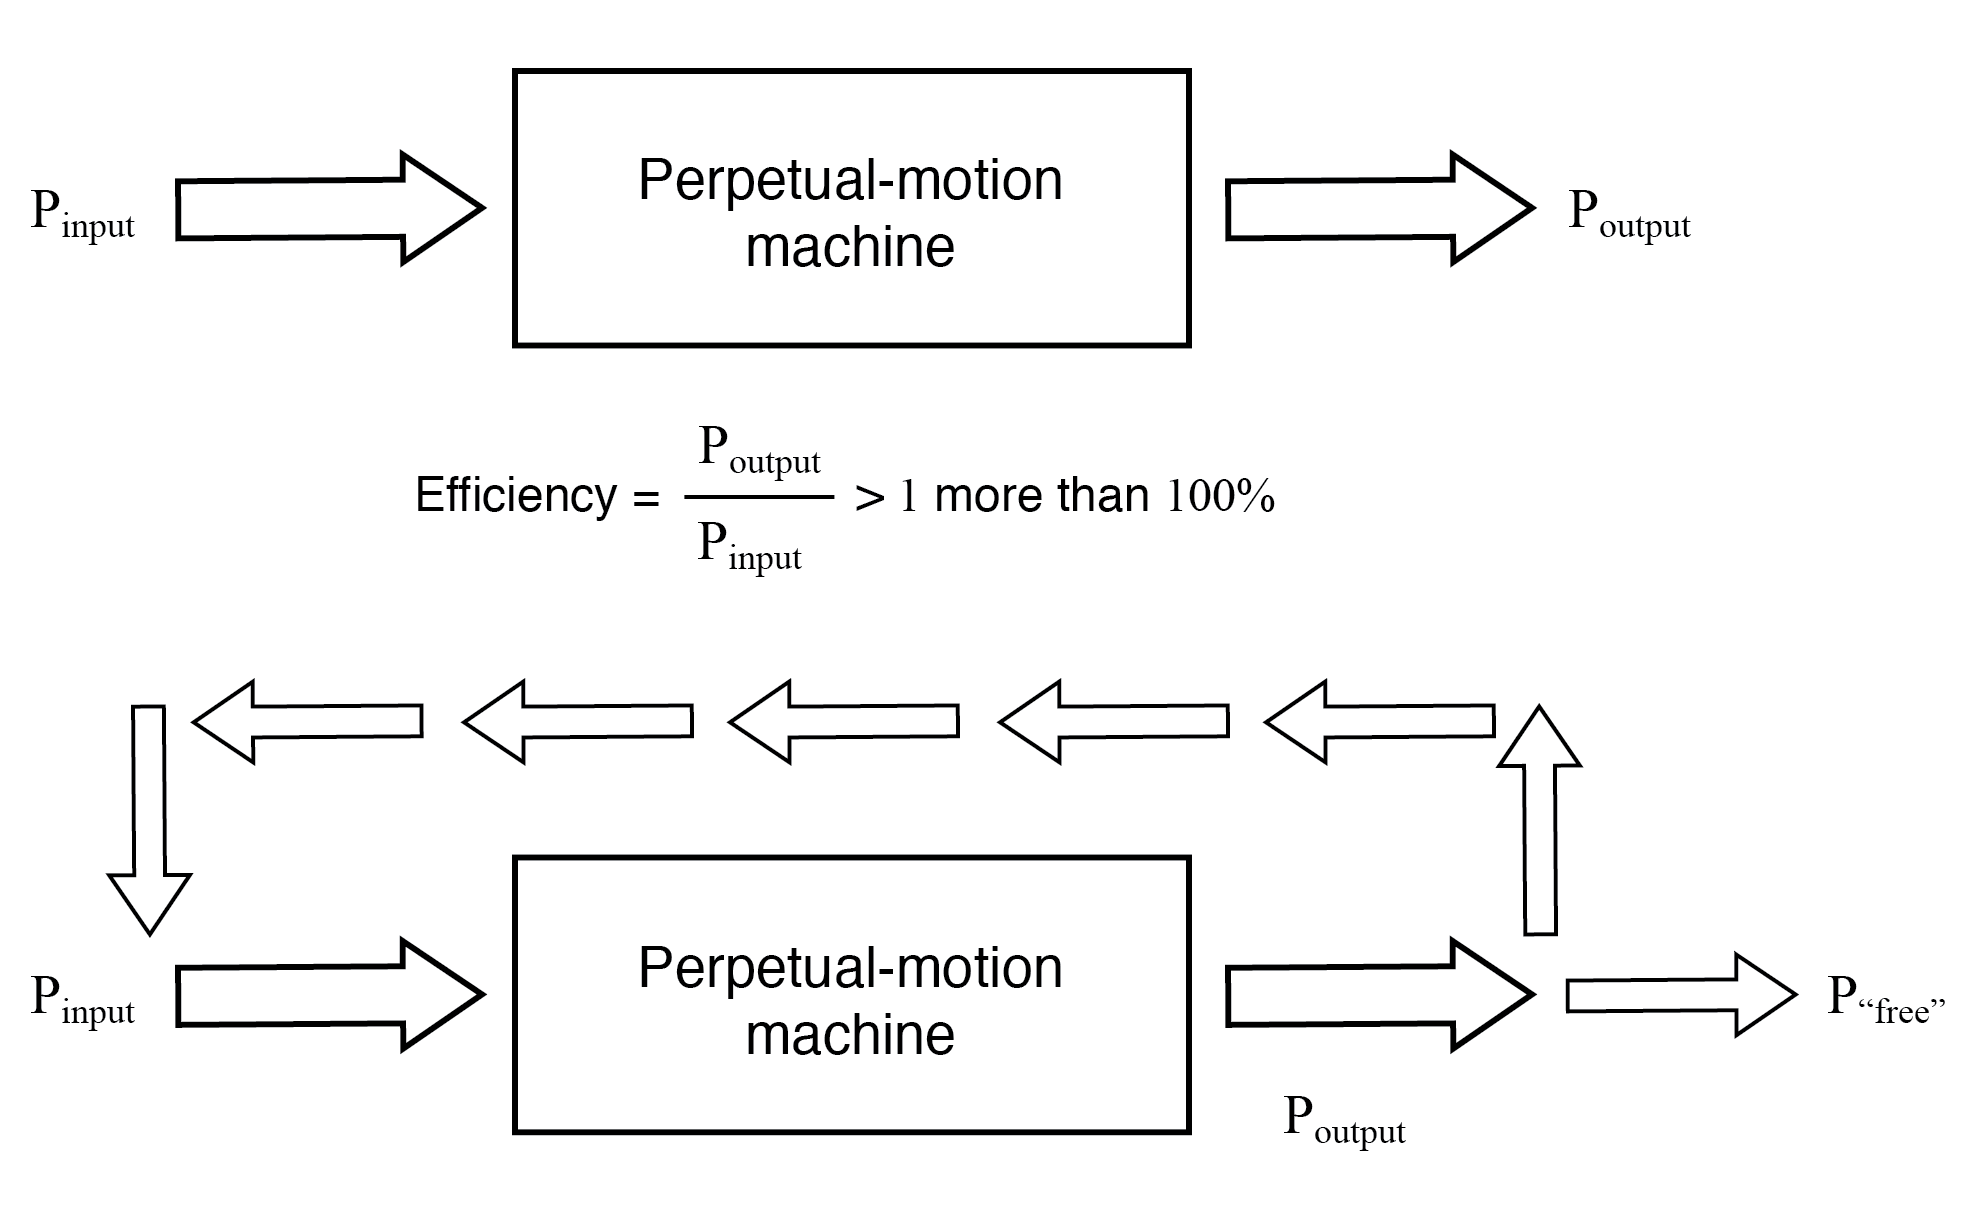 Hypothetical “perpetual motion machine” powers itself?